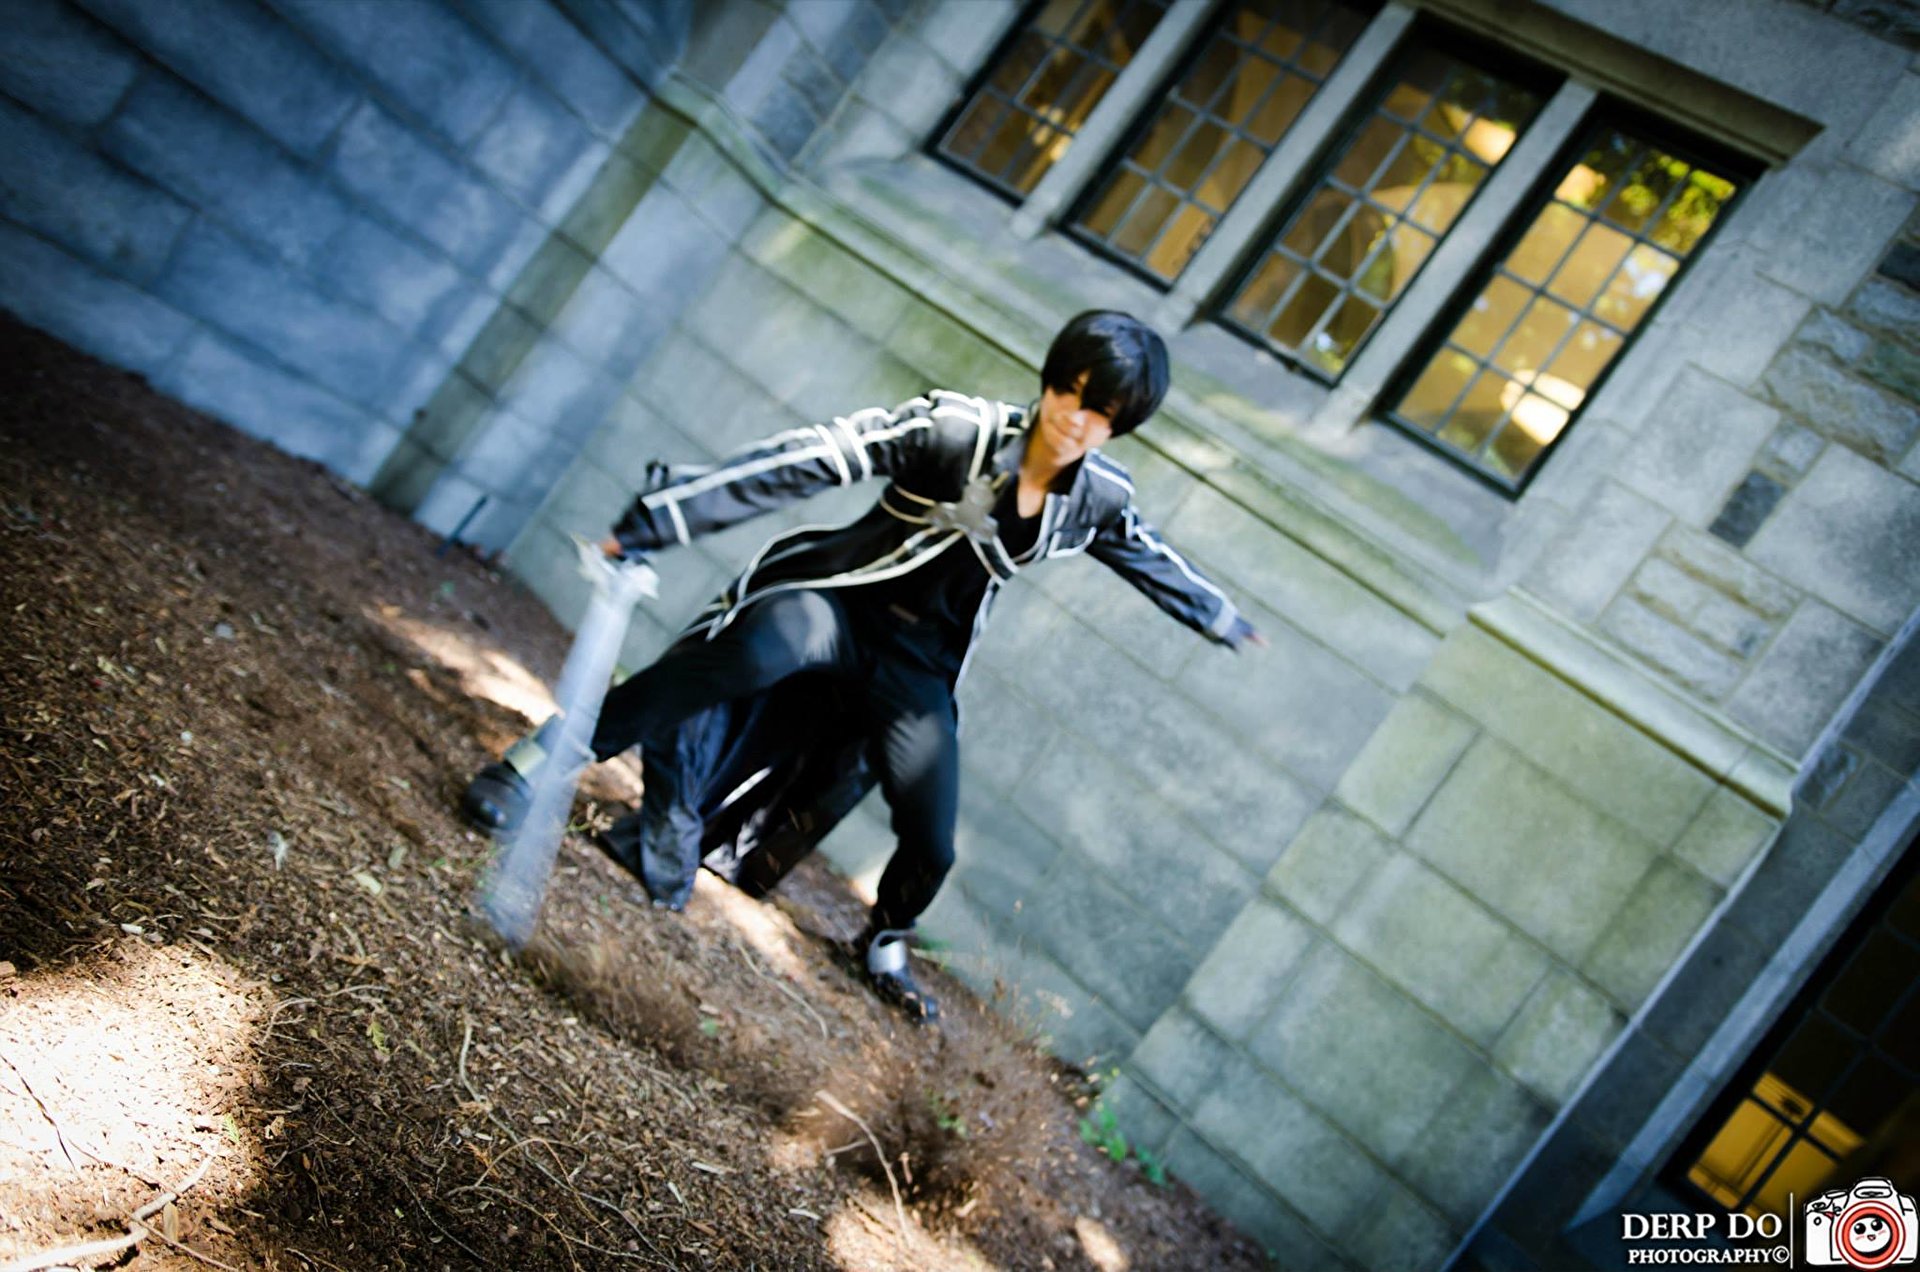 Cospix.net photo featuring Isho Cosplay